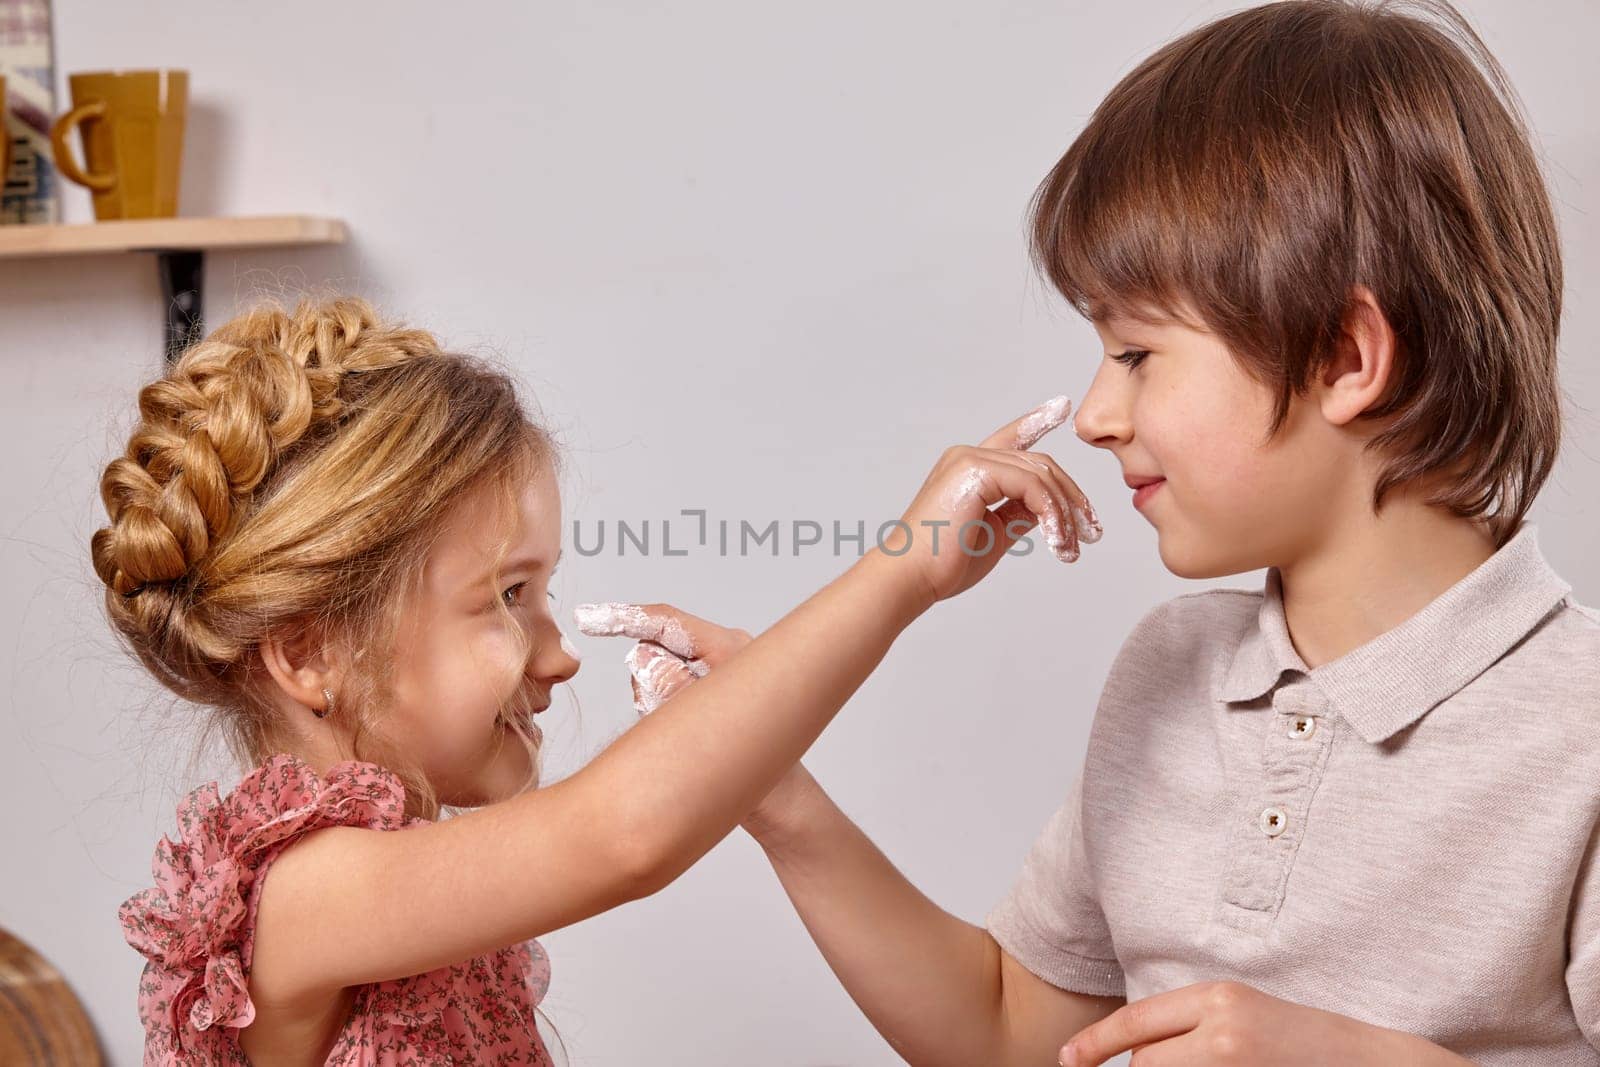 Funny boy dressed in a light t-shirt and jeans and a pretty girl with a braid in her hair, wearing in a pink dress are making a cake at a kitchen, against a white wall with shelves on it. They are smearing noses to each other with an icing sugar.